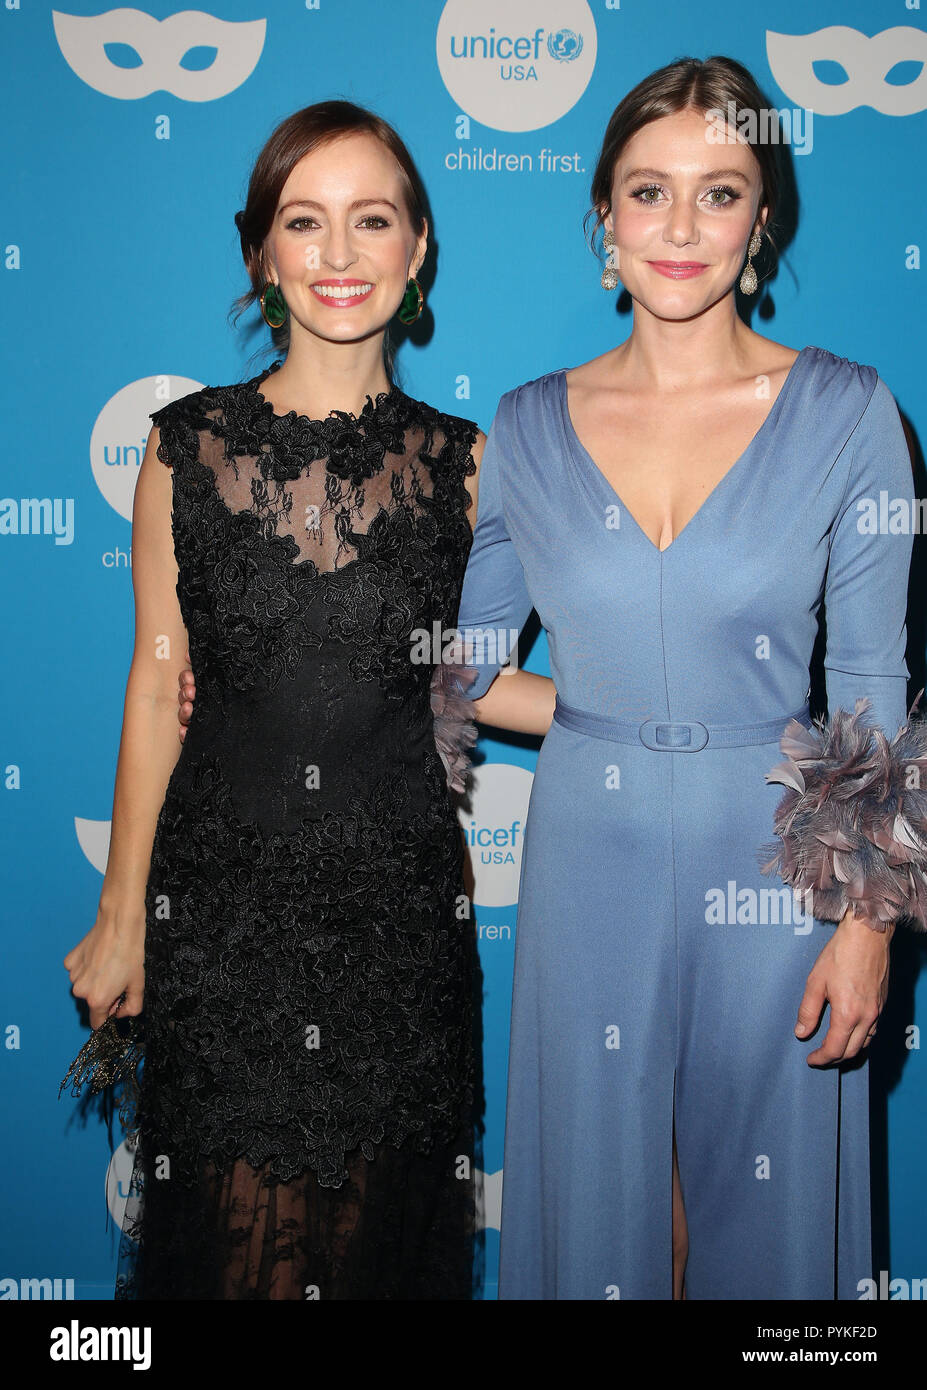 October 25, 2018 - Los Angeles, California, U.S. - Ahna O'Reilly, Julianna Guill during arrivals for the 6th Annual UNICEF Masquerade Ball. (Credit Image: © Faye Sadou/AdMedia via ZUMA Wire) Stock Photo